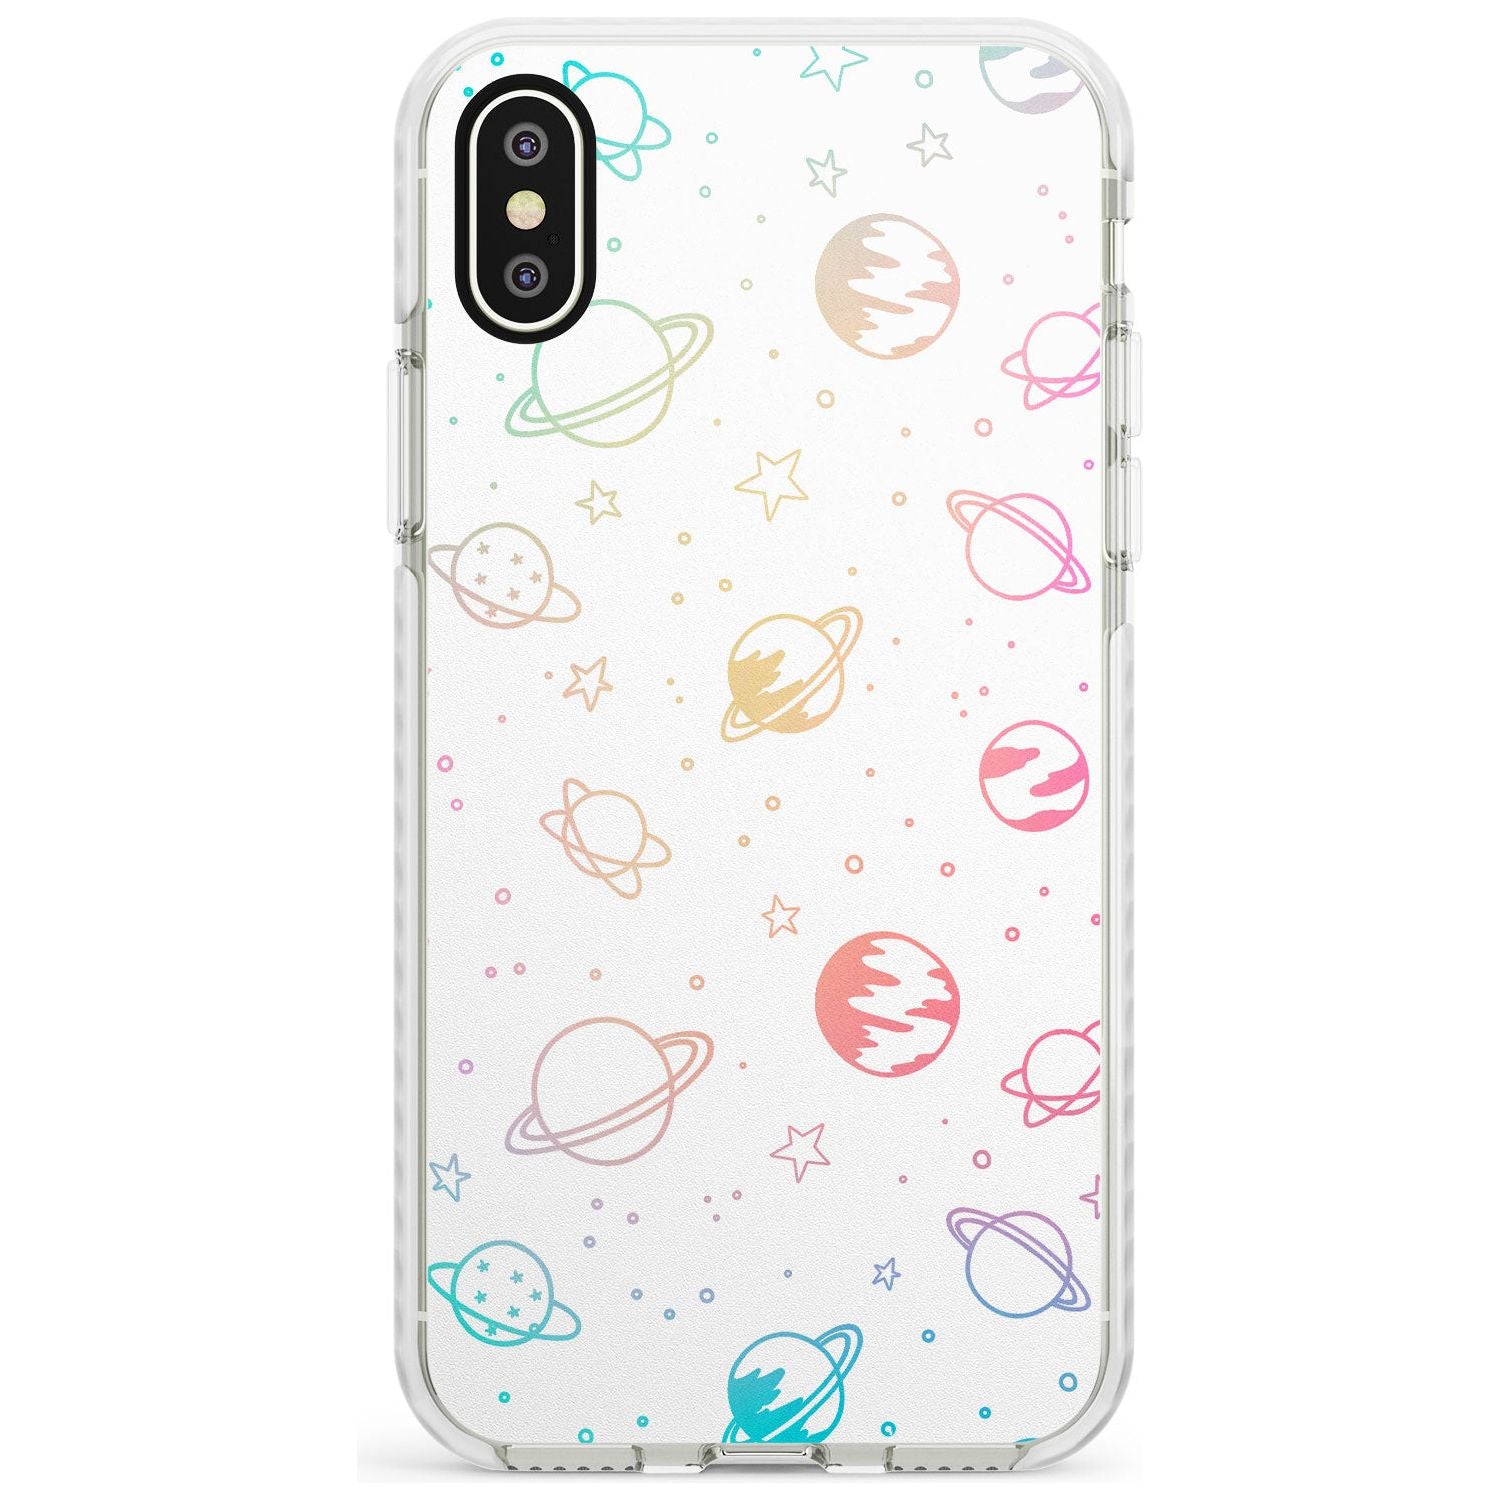 Outer Space Outlines: Pastels on White Slim TPU Phone Case Warehouse X XS Max XR